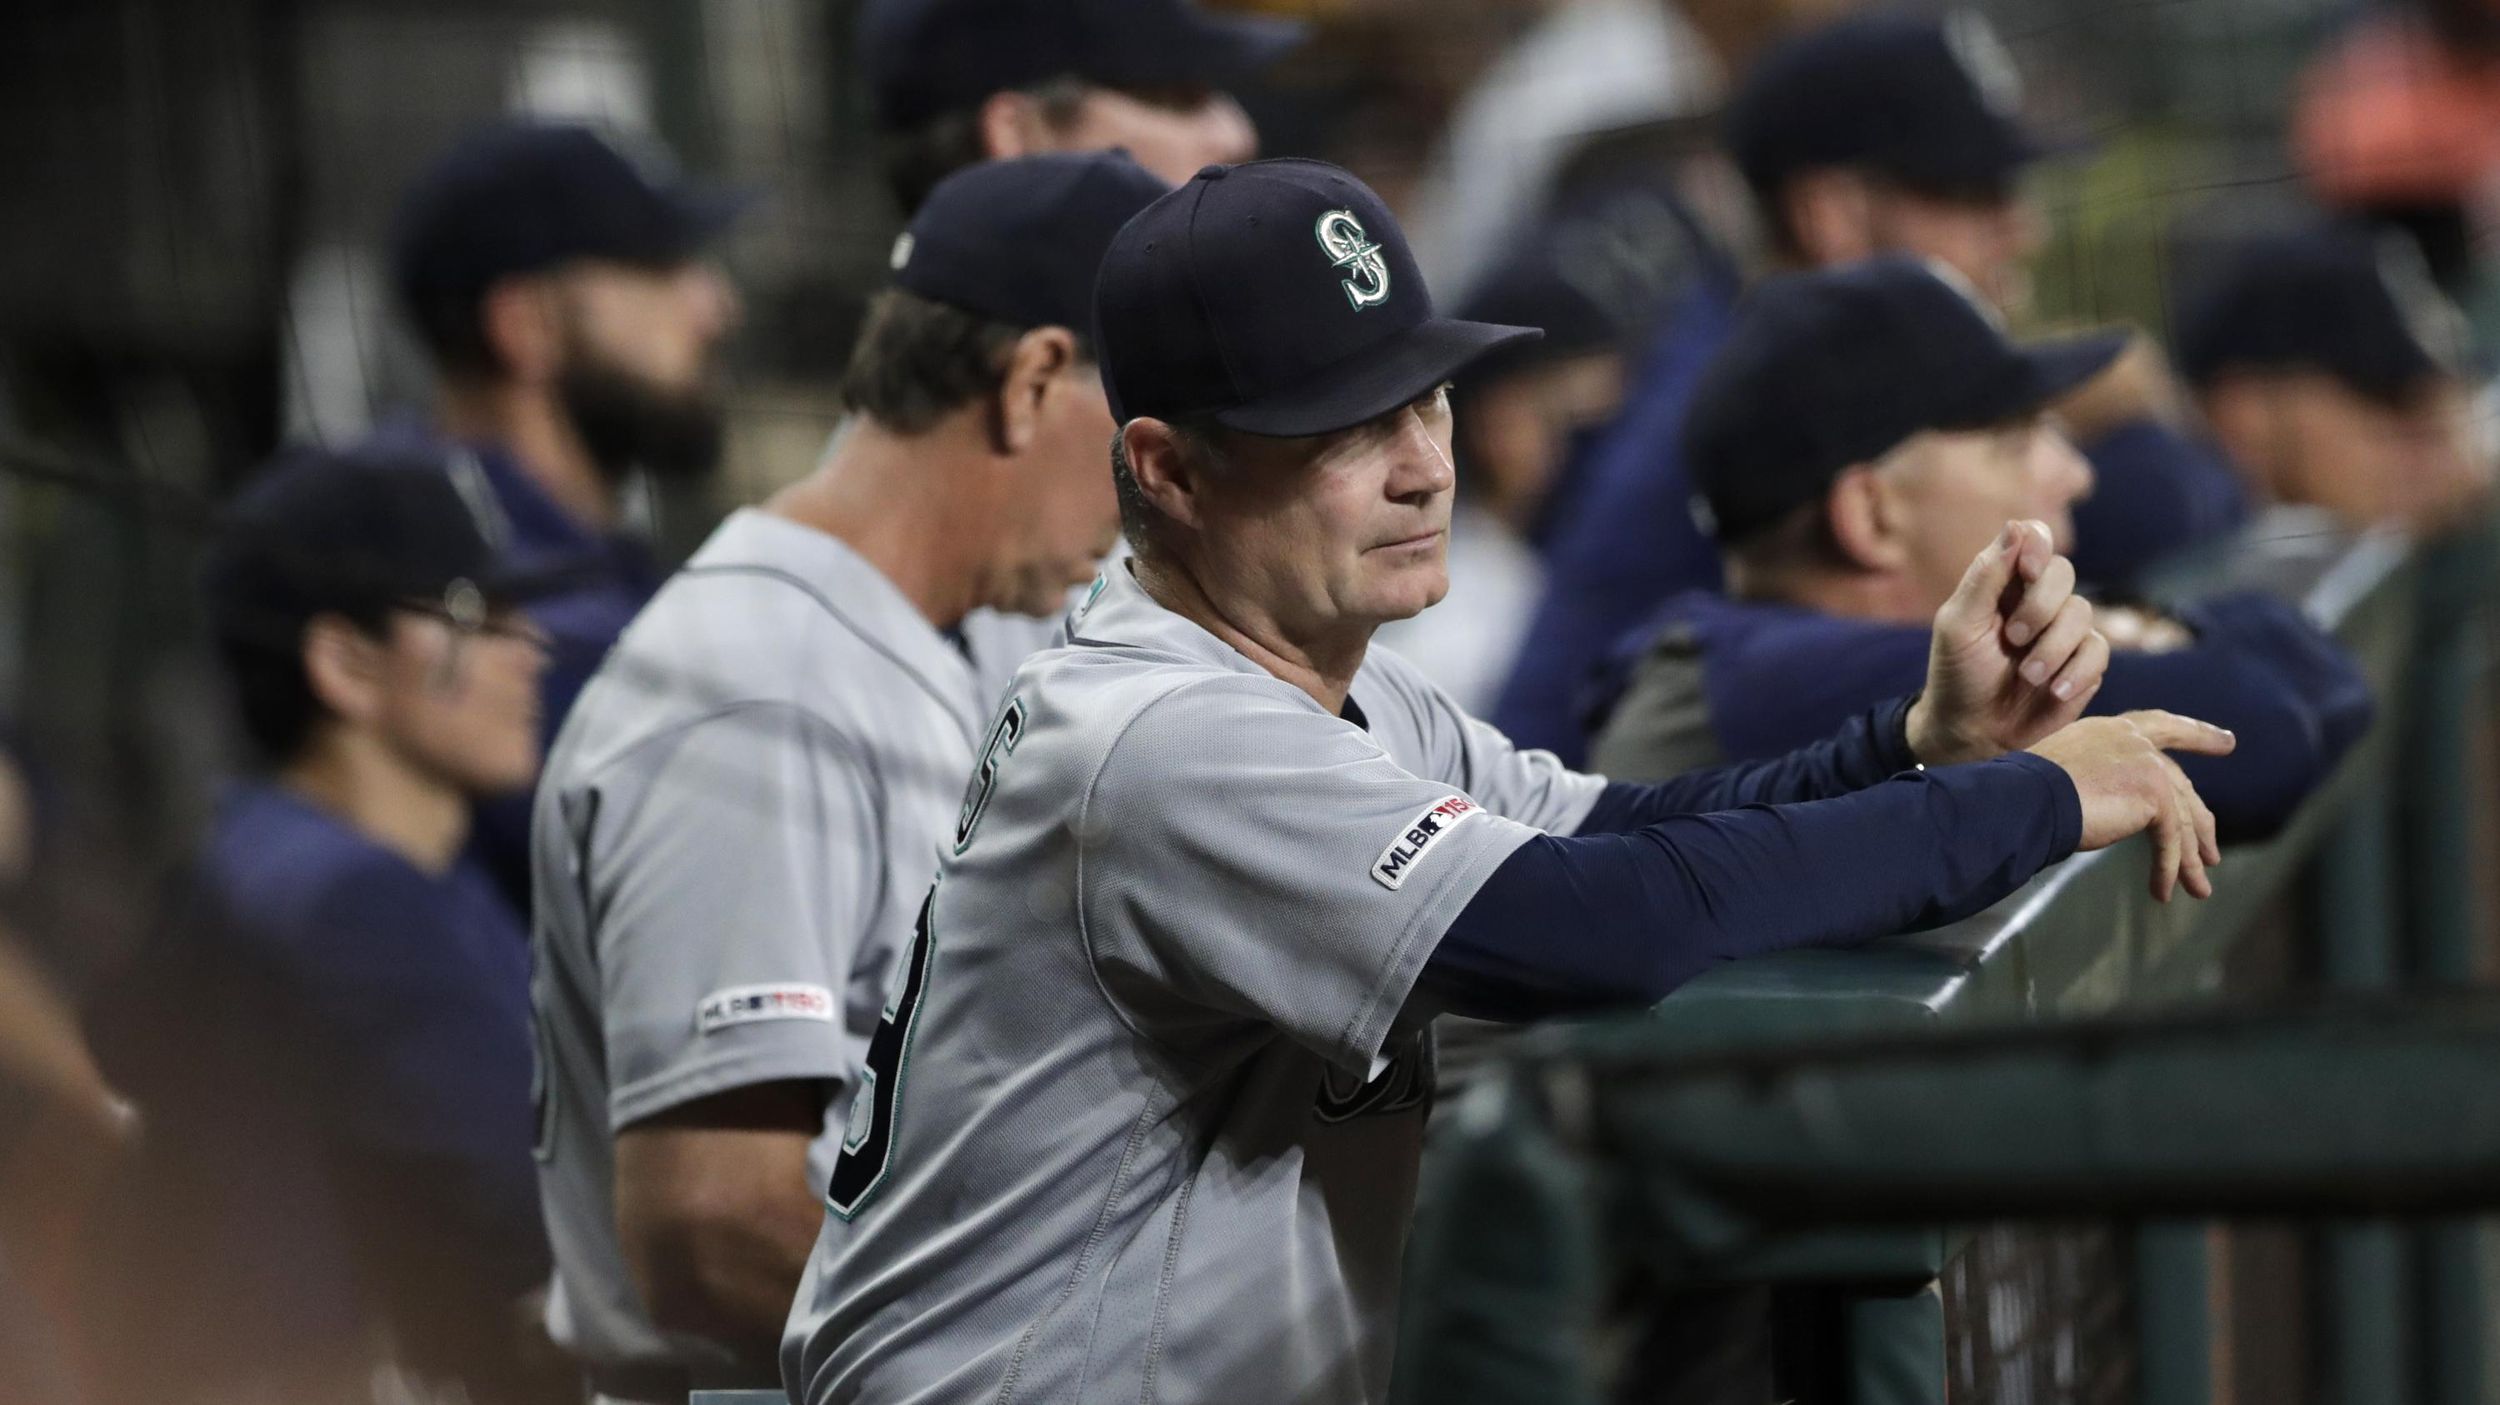 Mariners new players don't want to rebuild in 2019 season